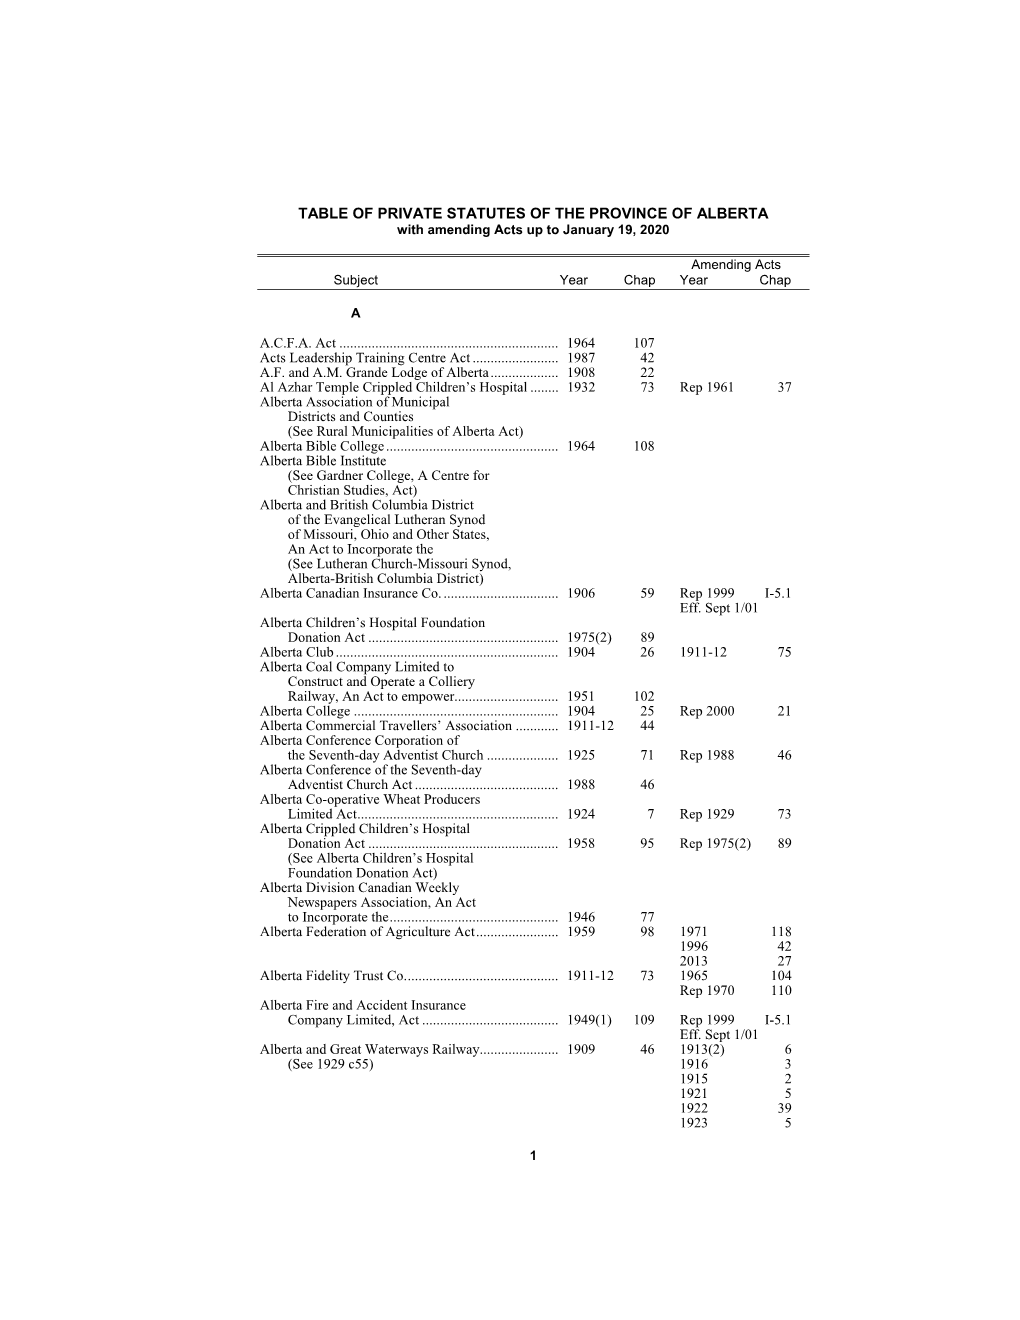 TABLE of PRIVATE STATUTES of the PROVINCE of ALBERTA with Amending Acts up to January 19, 2020